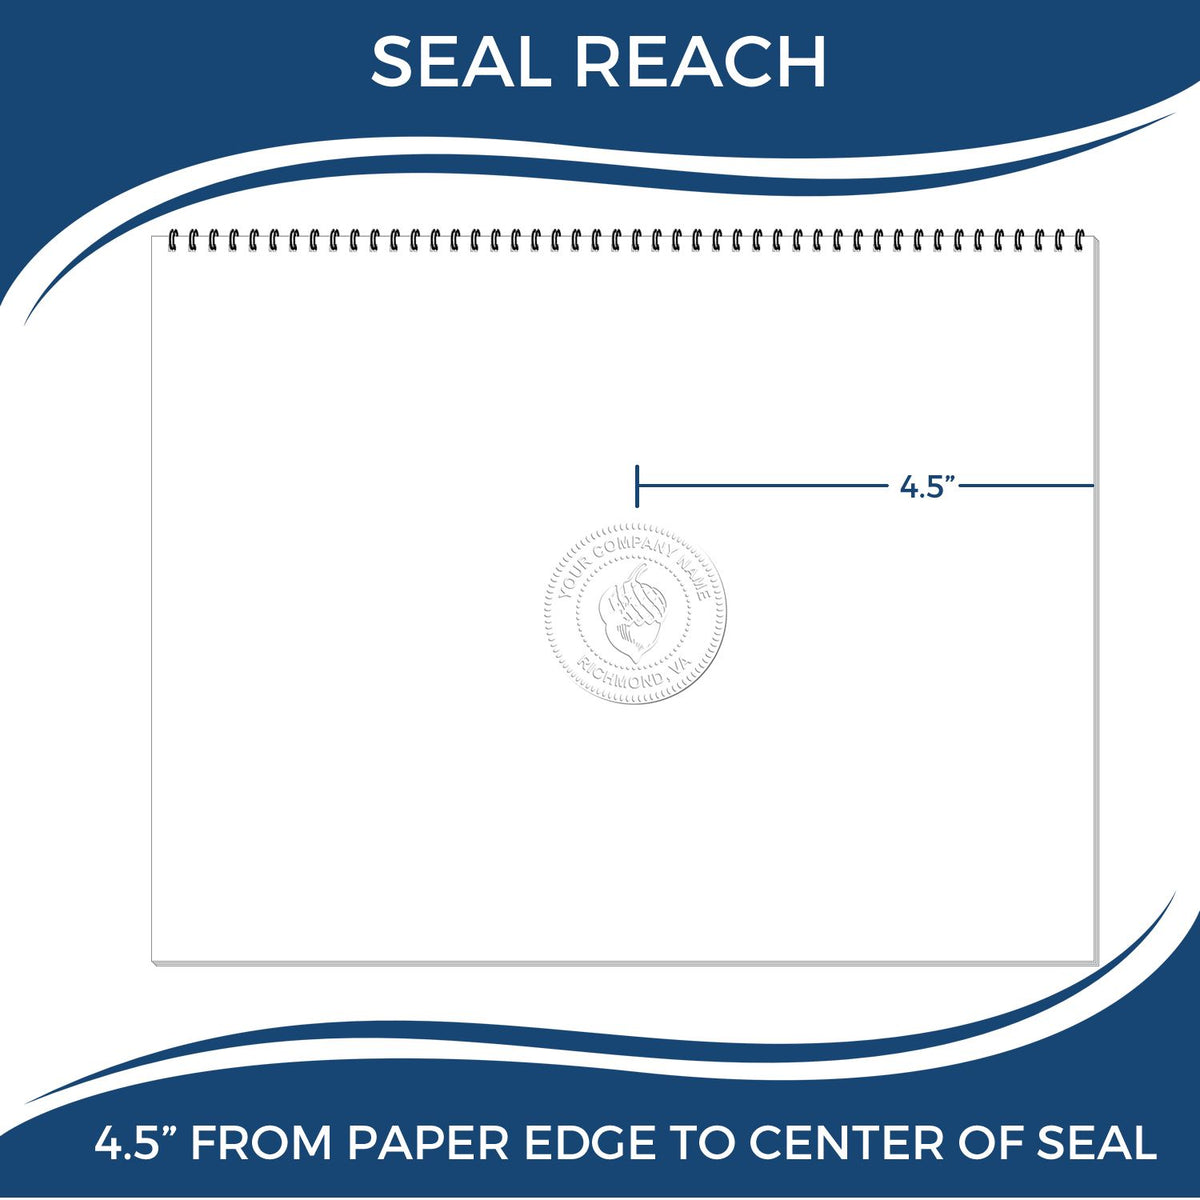 An infographic showing the seal reach which is represented by a ruler and a miniature seal image of the State of Hawaii Extended Long Reach Engineer Seal